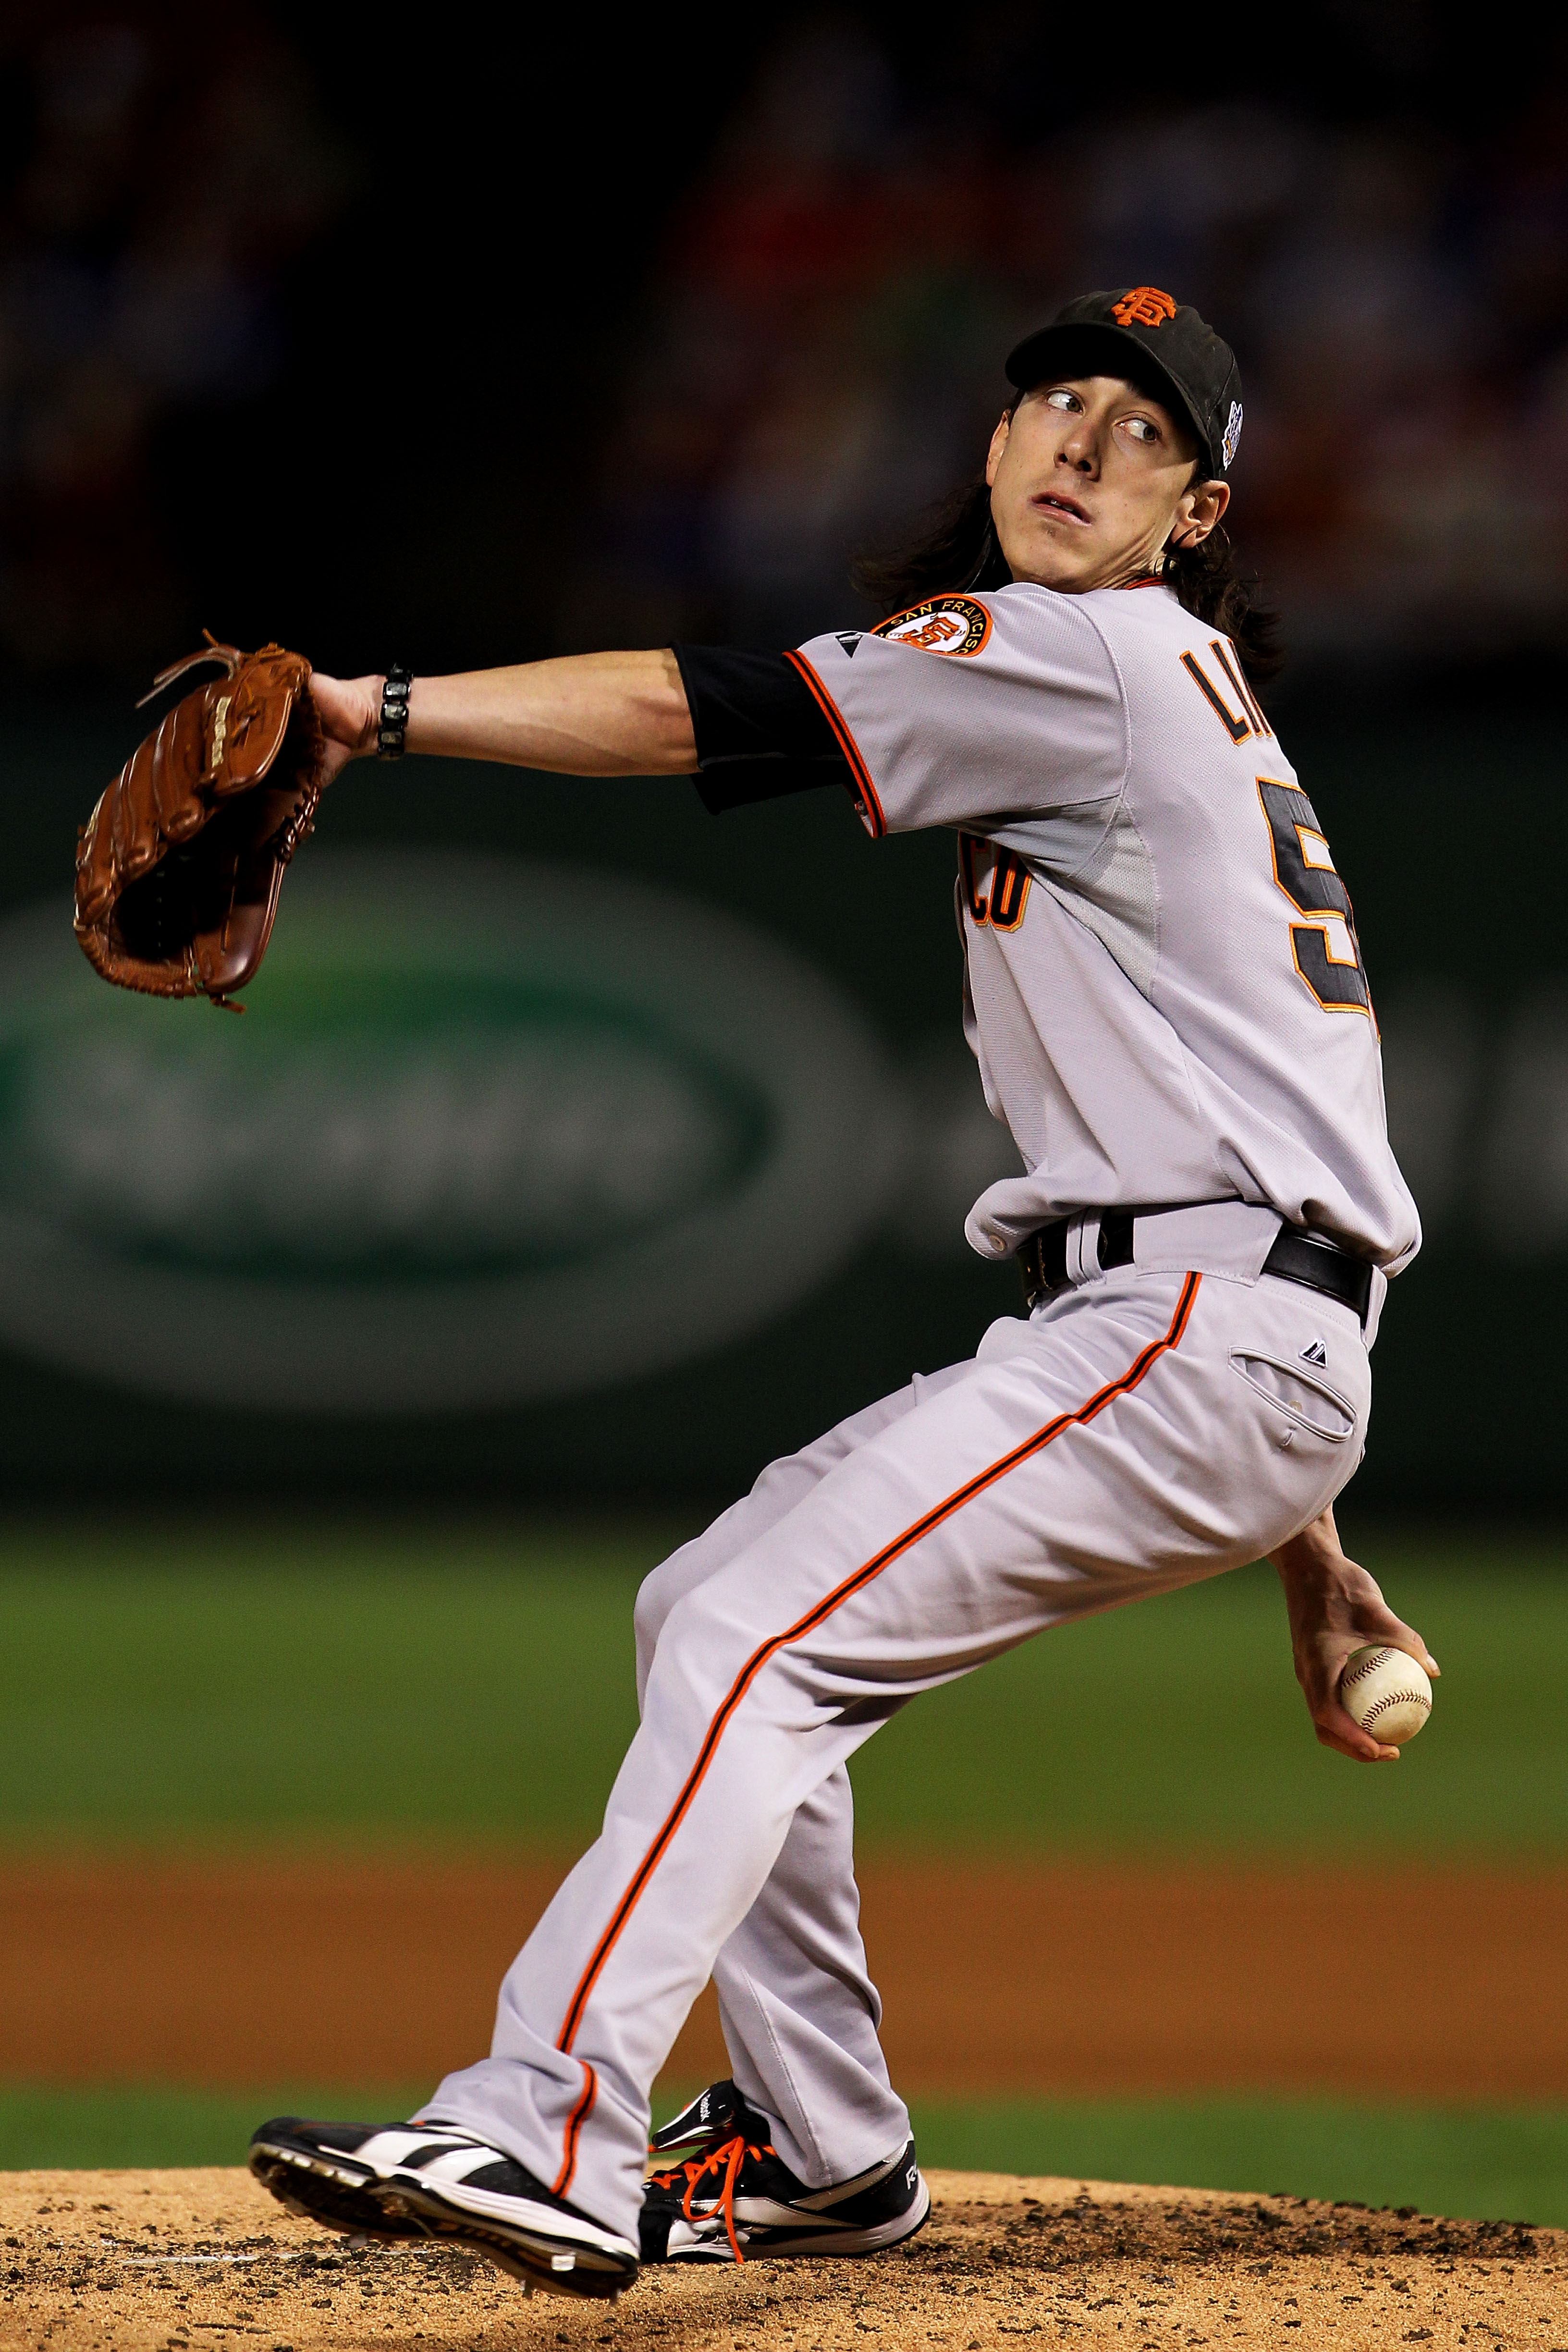 Arlington represents a land of opportunity for Tim Lincecum, and